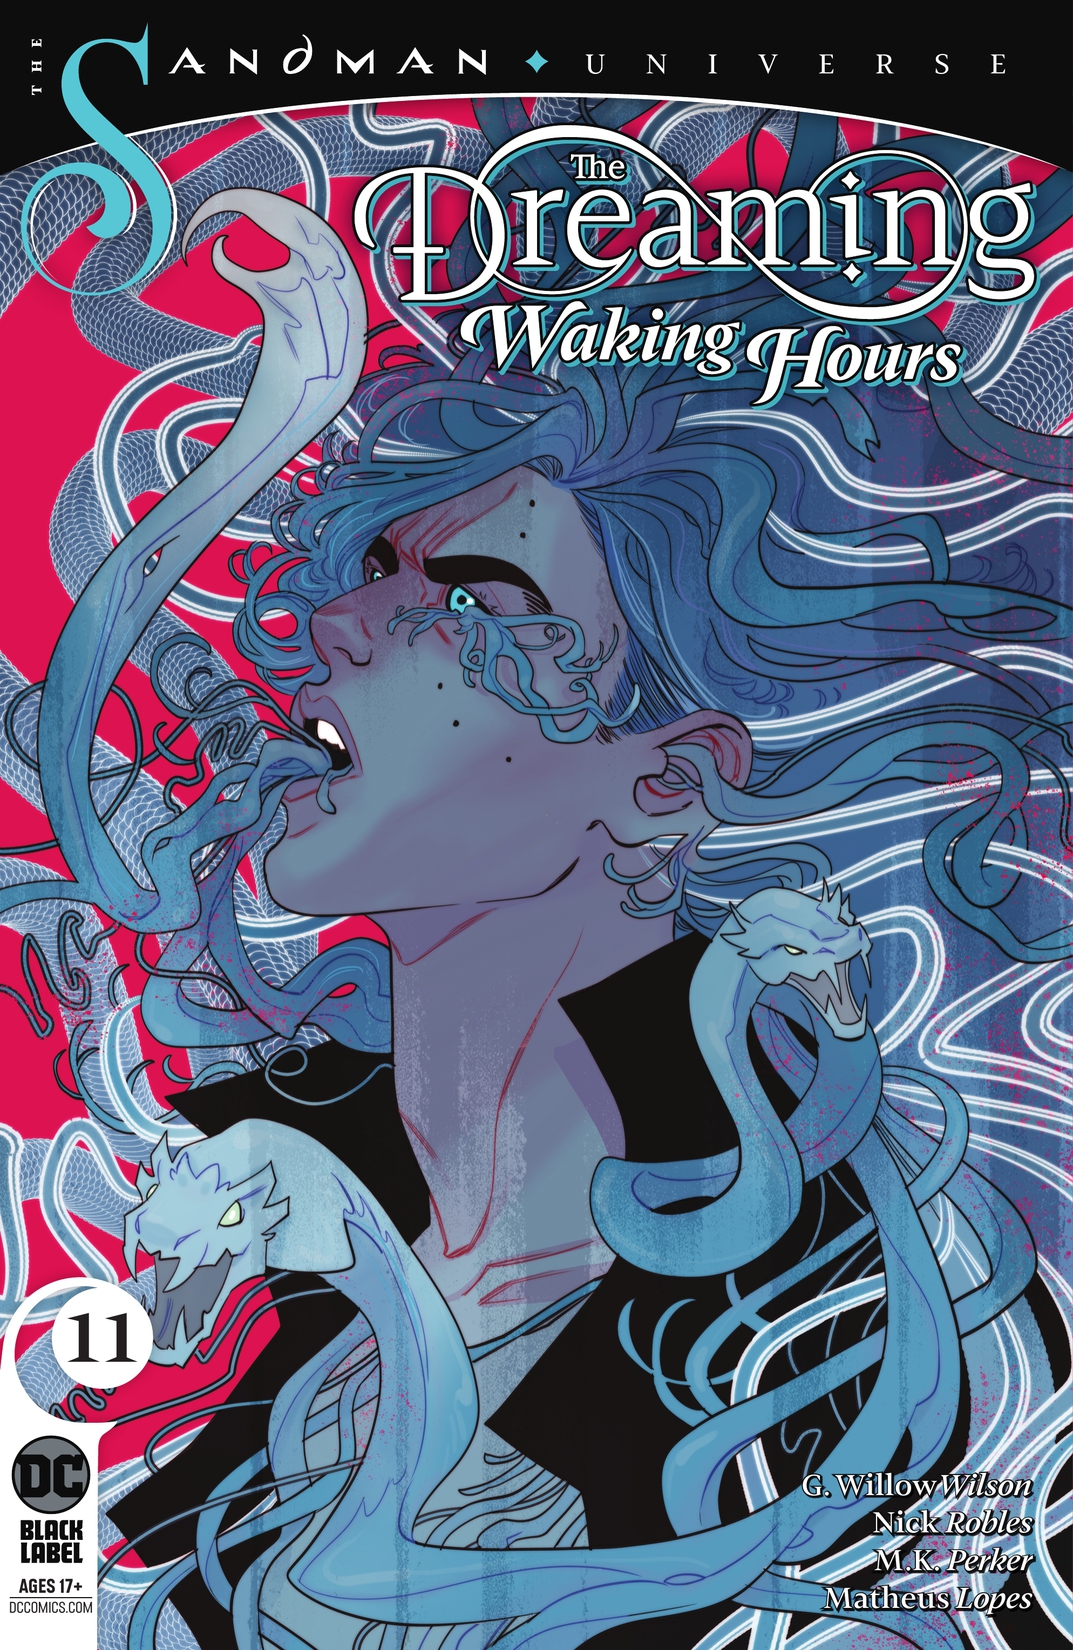 The Dreaming: Waking Hours #11 preview images